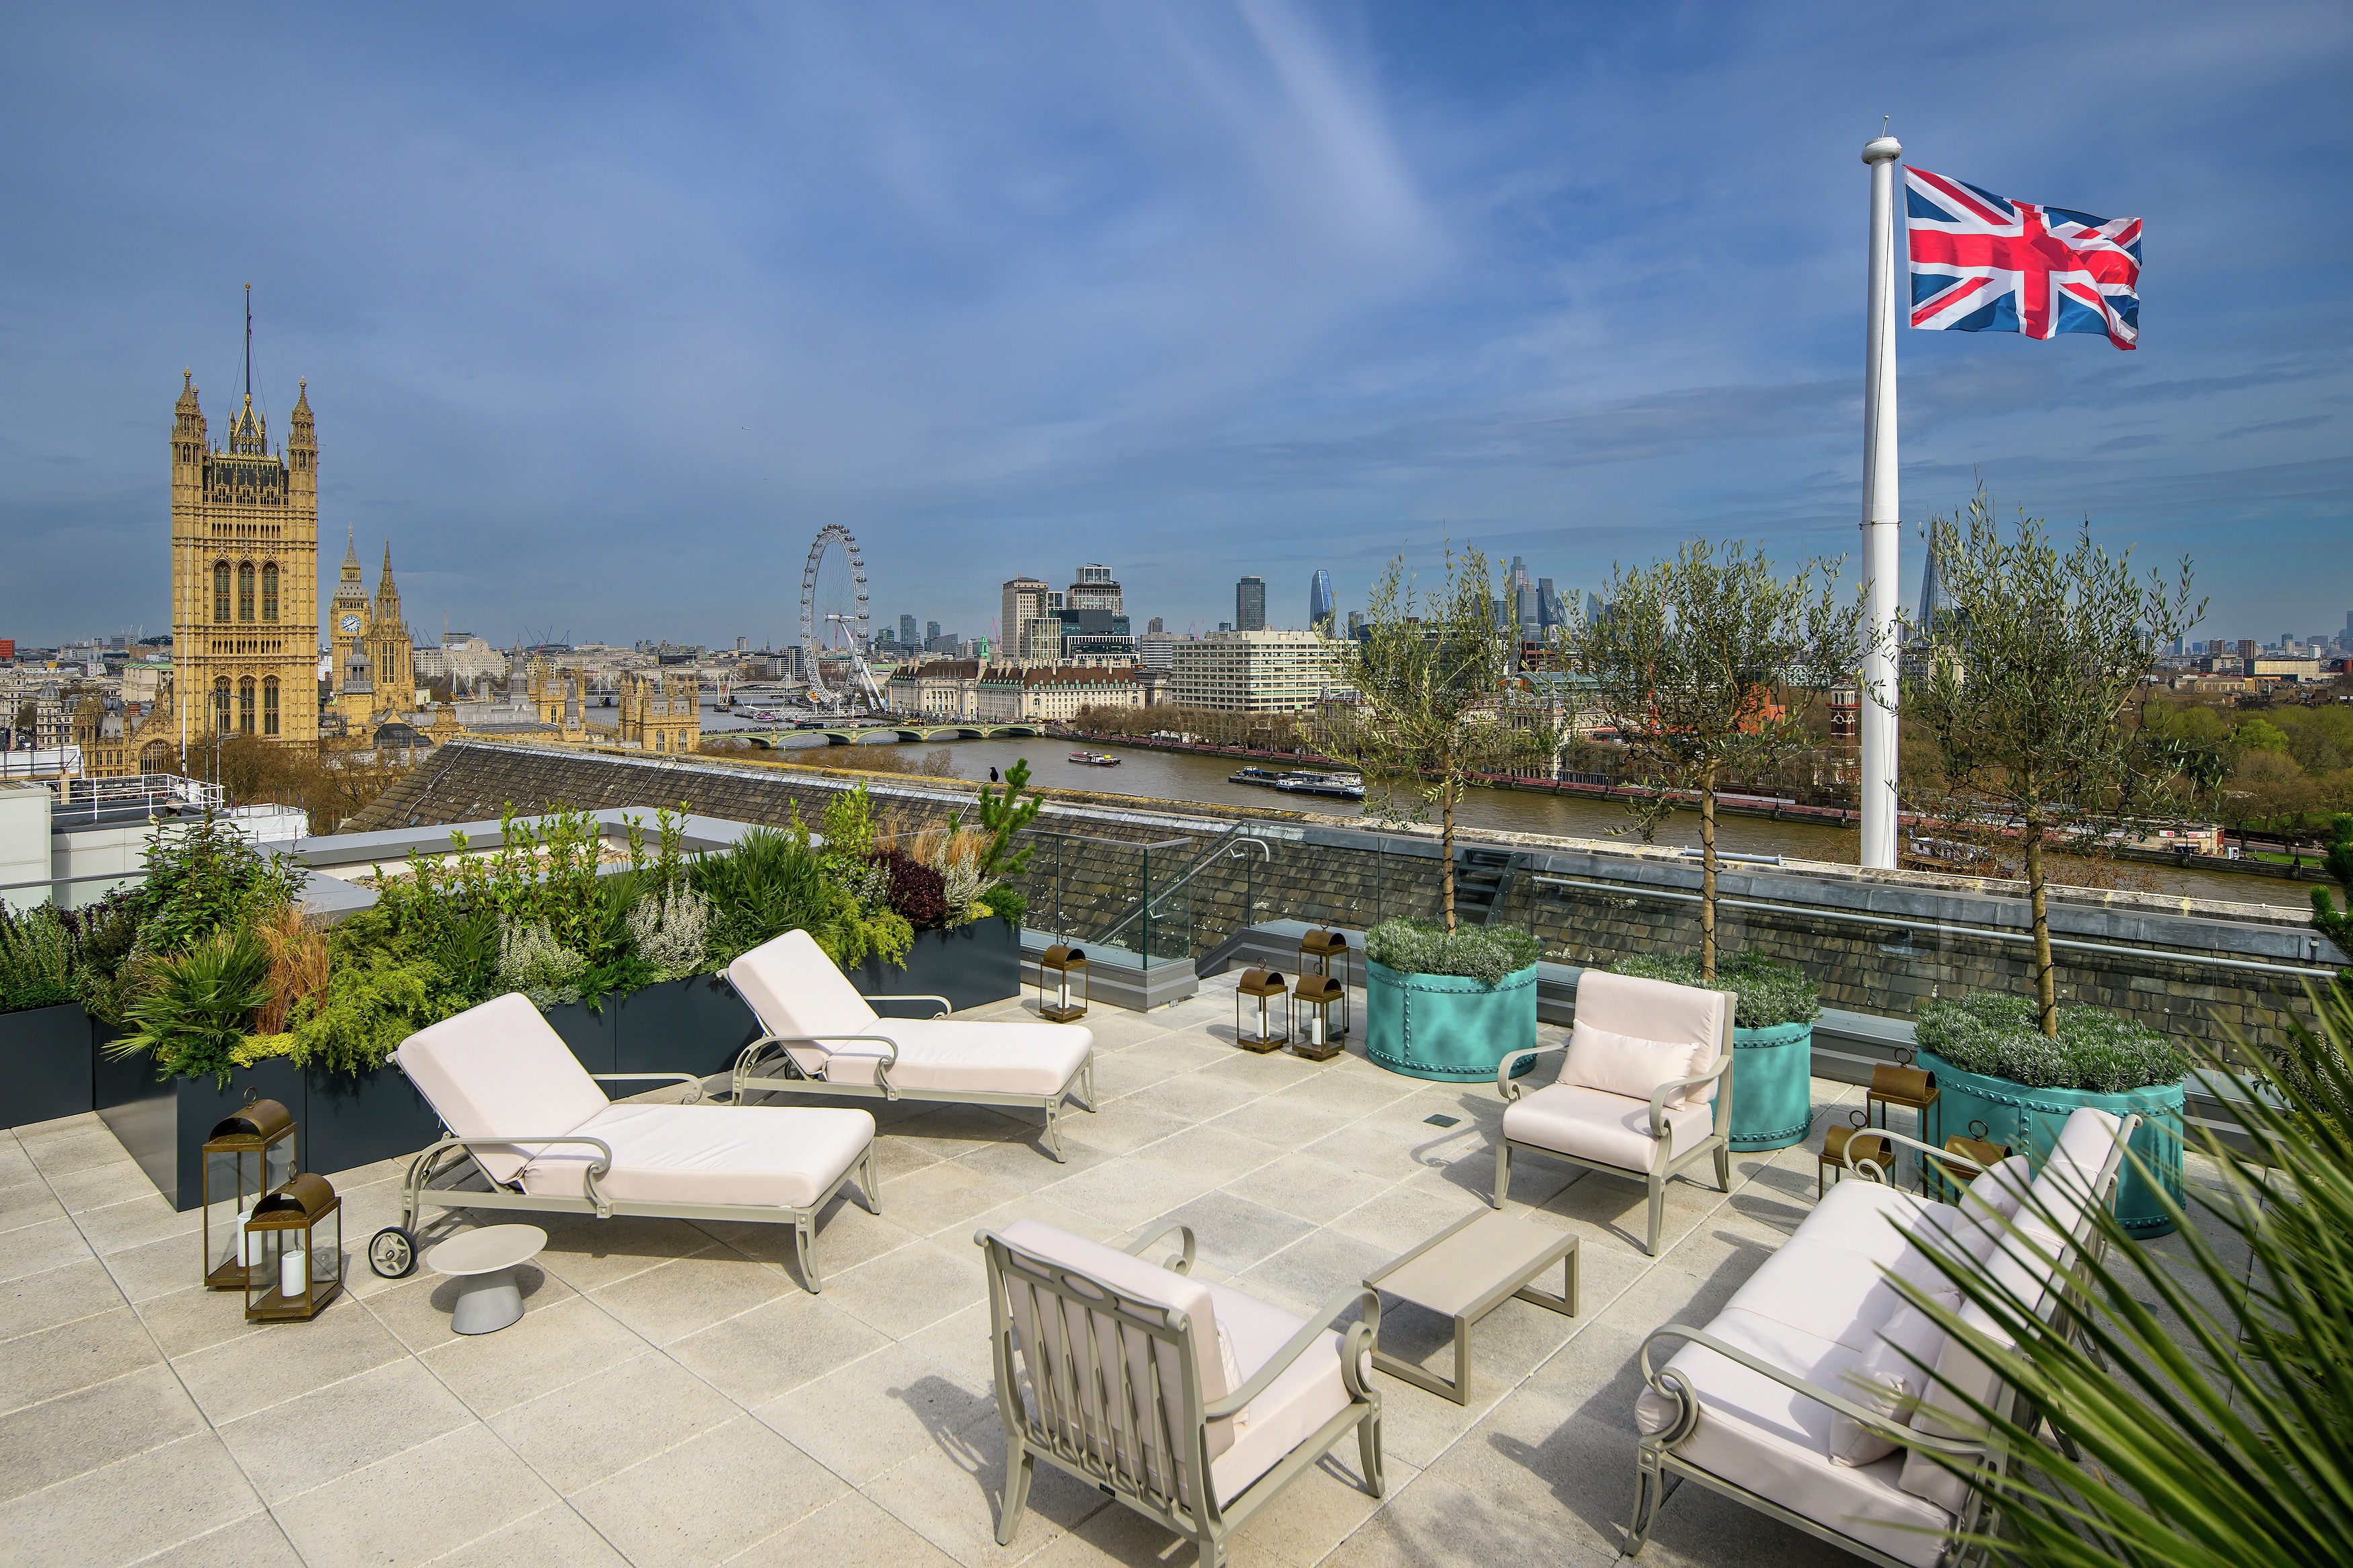 The Astor duplex at 9 Millbank features a private roof terrace